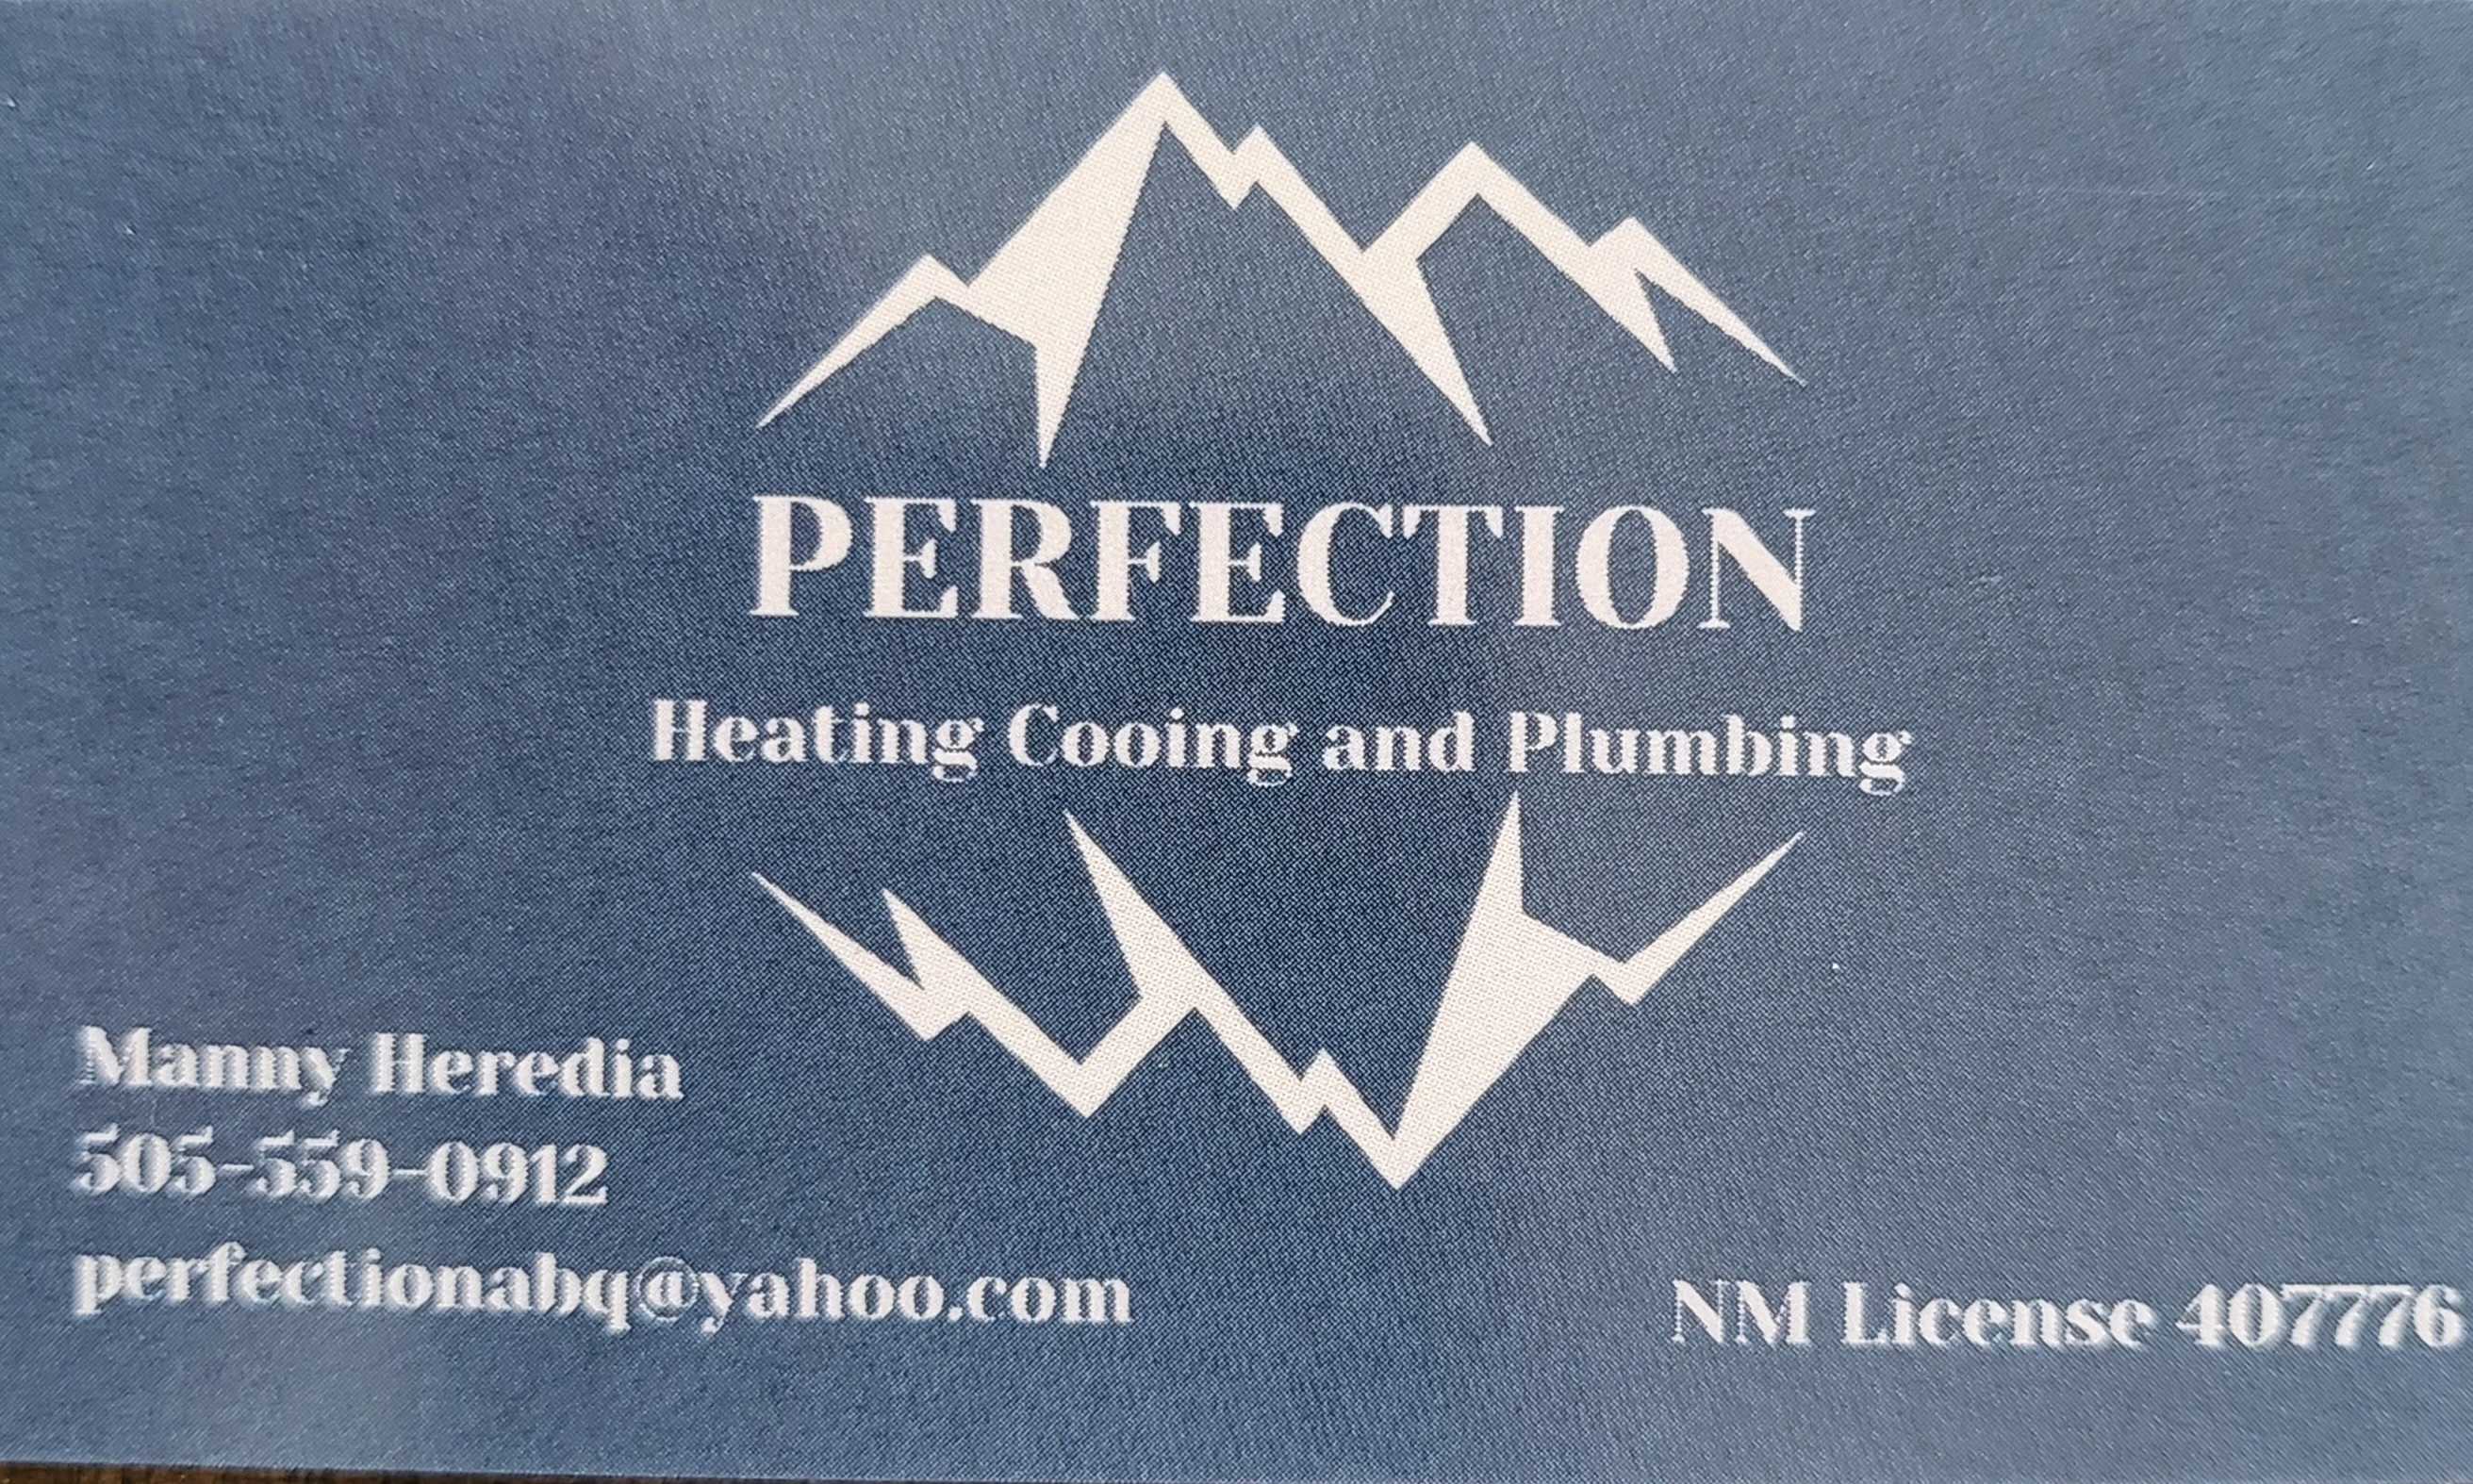 Perfection Heating Cooling and Plumbing, LLC Logo